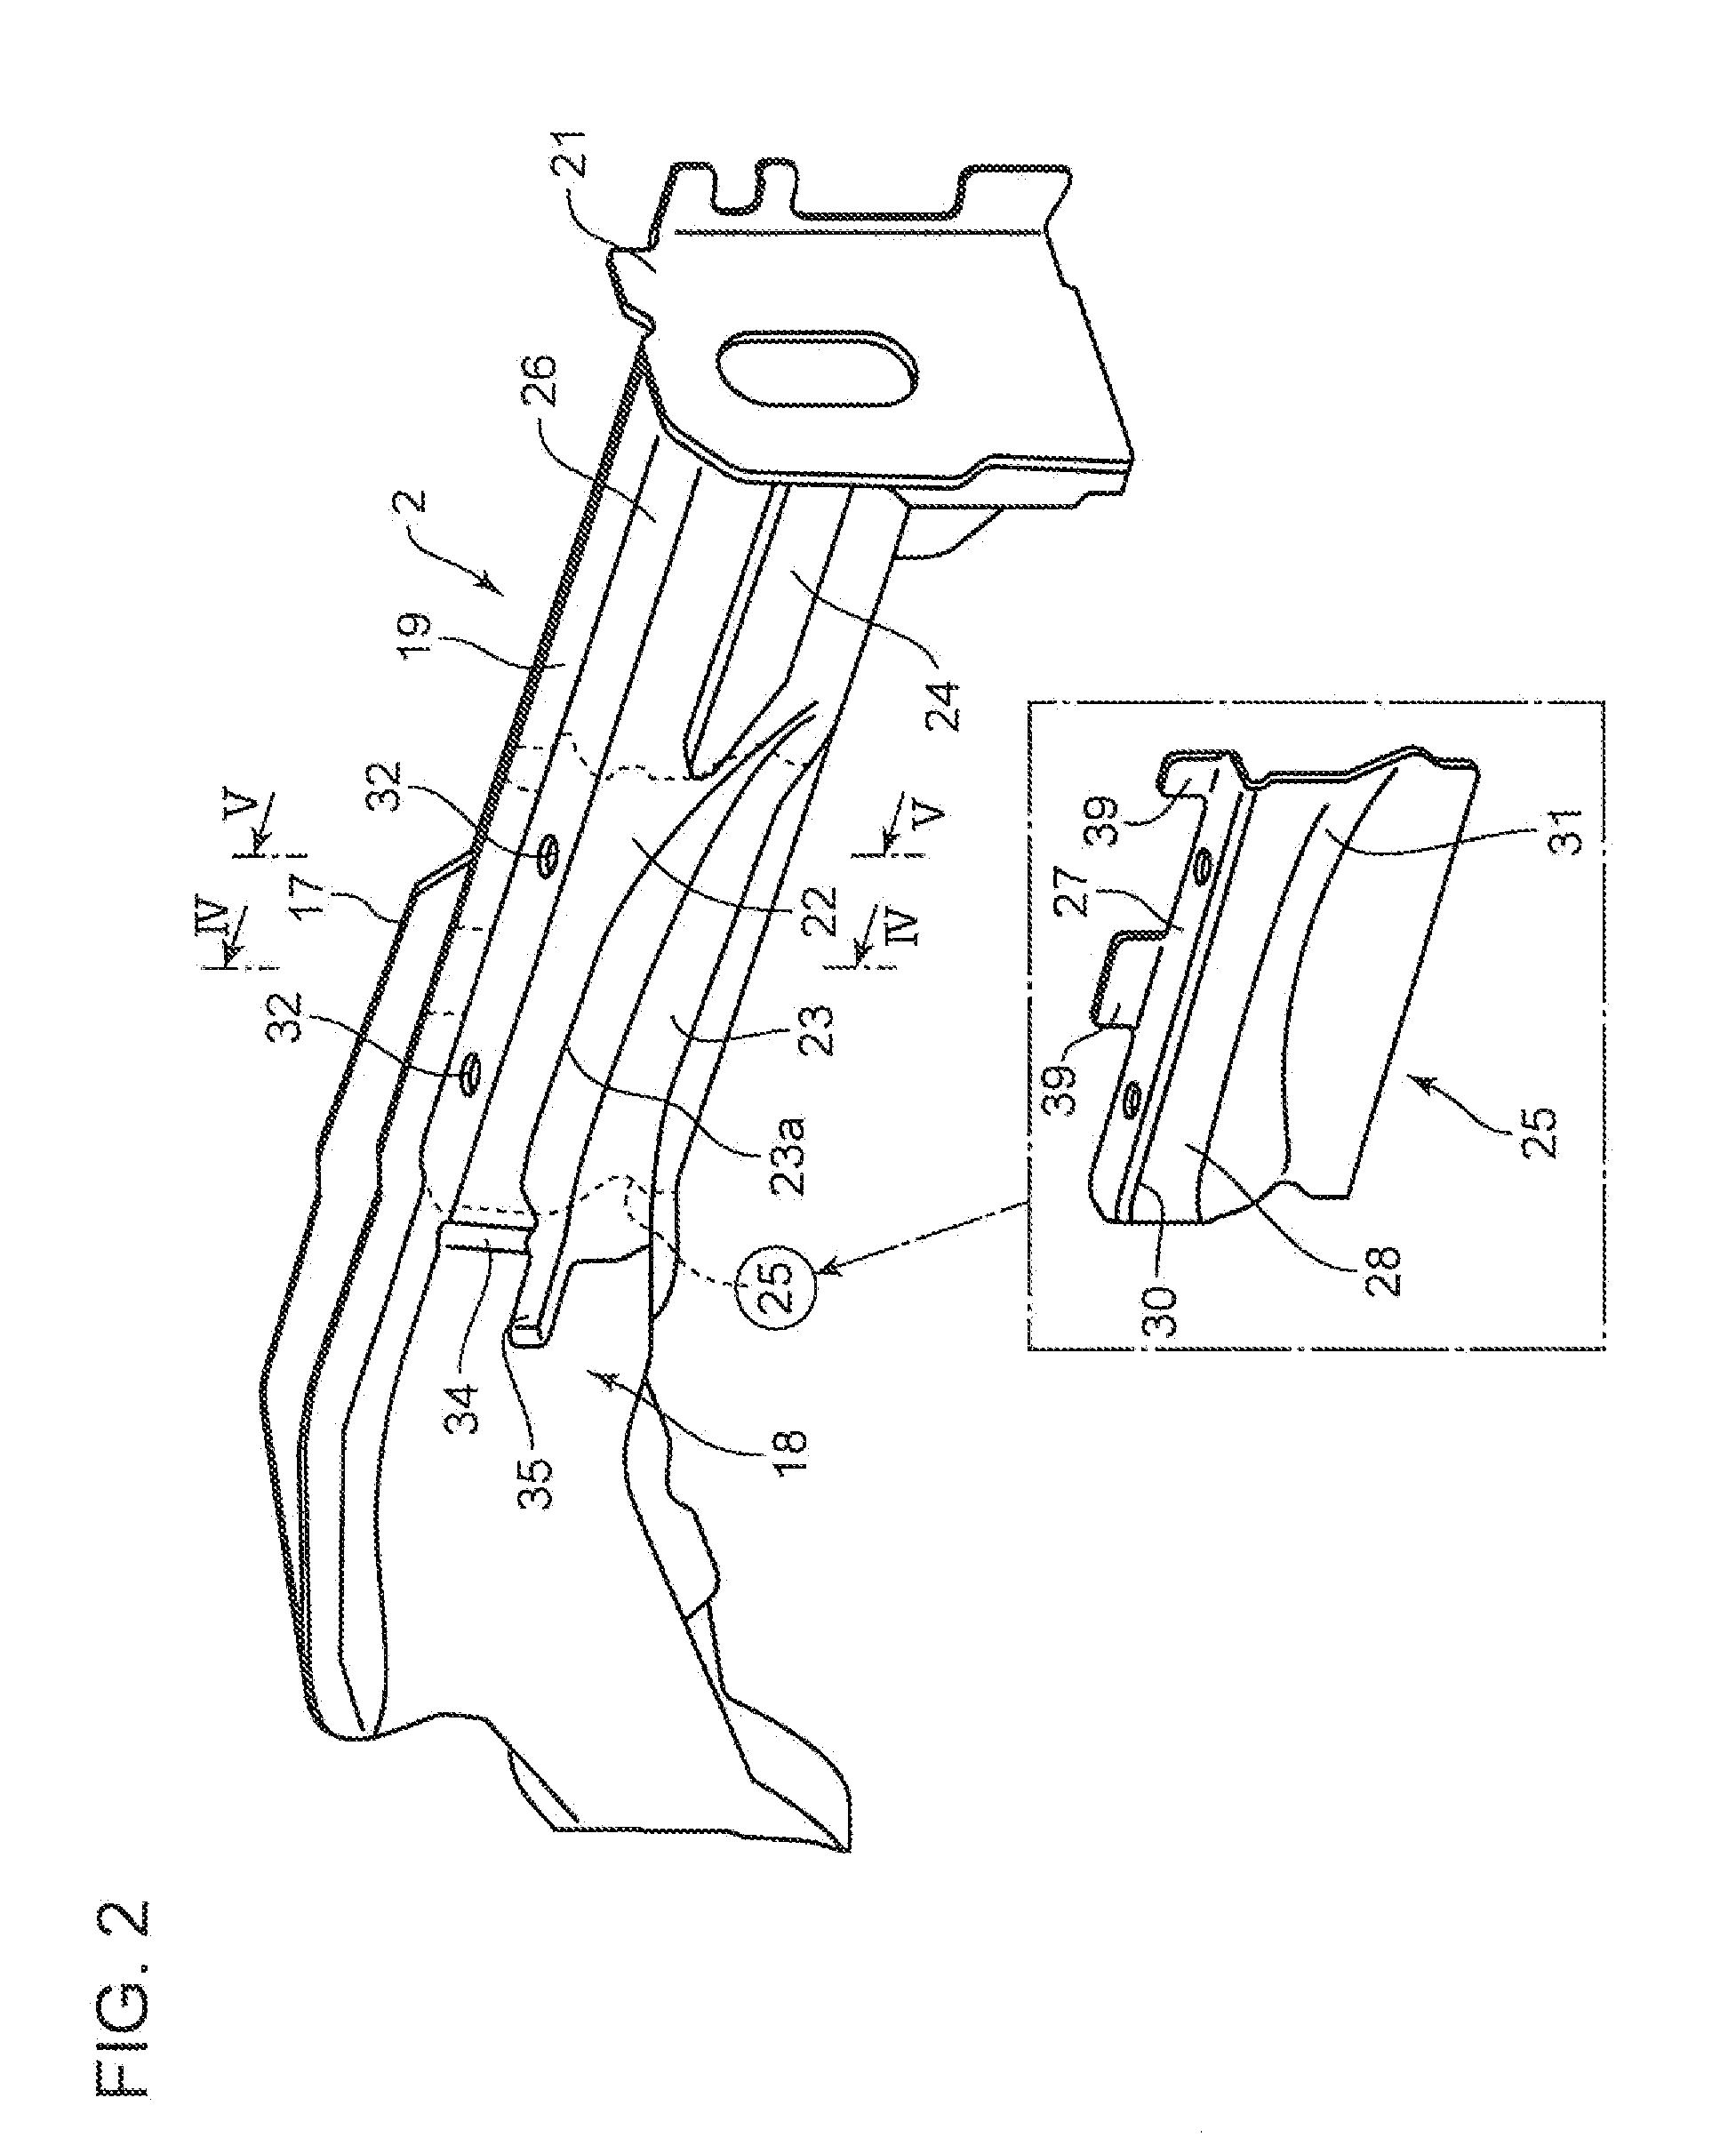 Vehicle front body structure